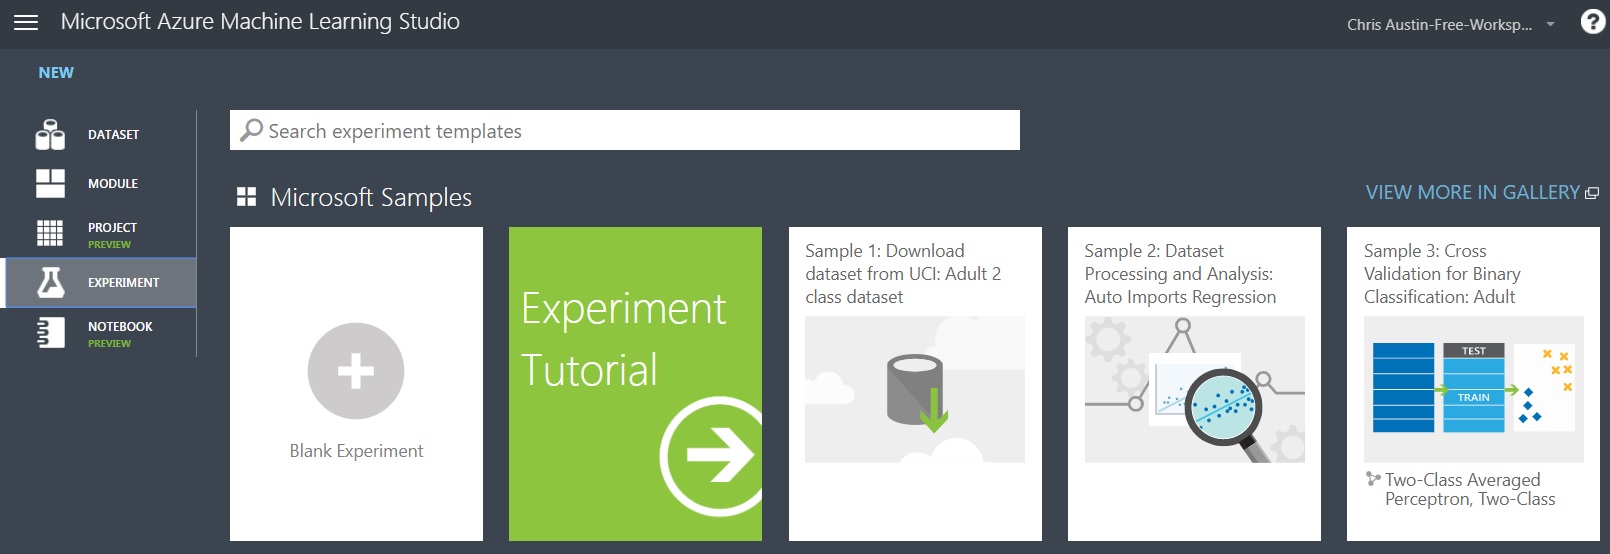 Experiment Options and Samples for Azure